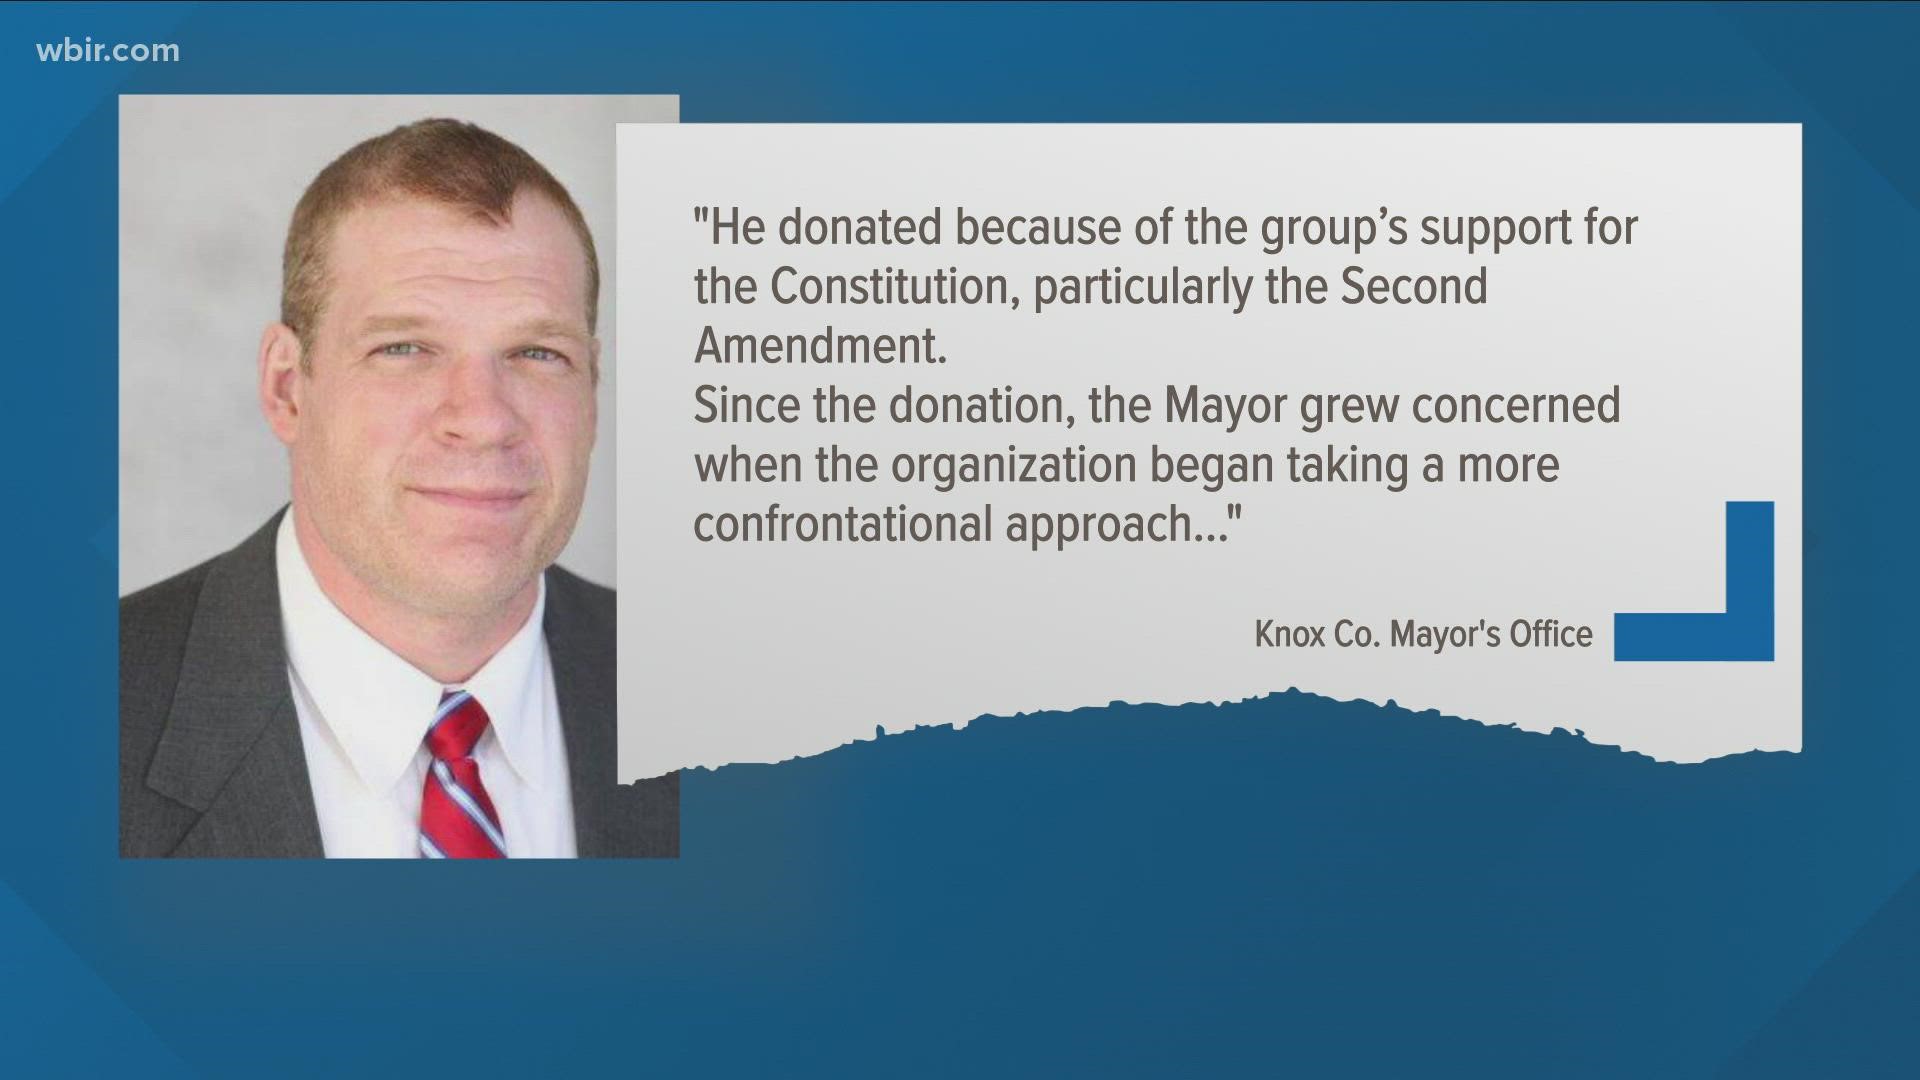 A spokesperson for the mayor said he "was never a member of the organization," but did donate $50 to the group once because of its Second Amendment views.